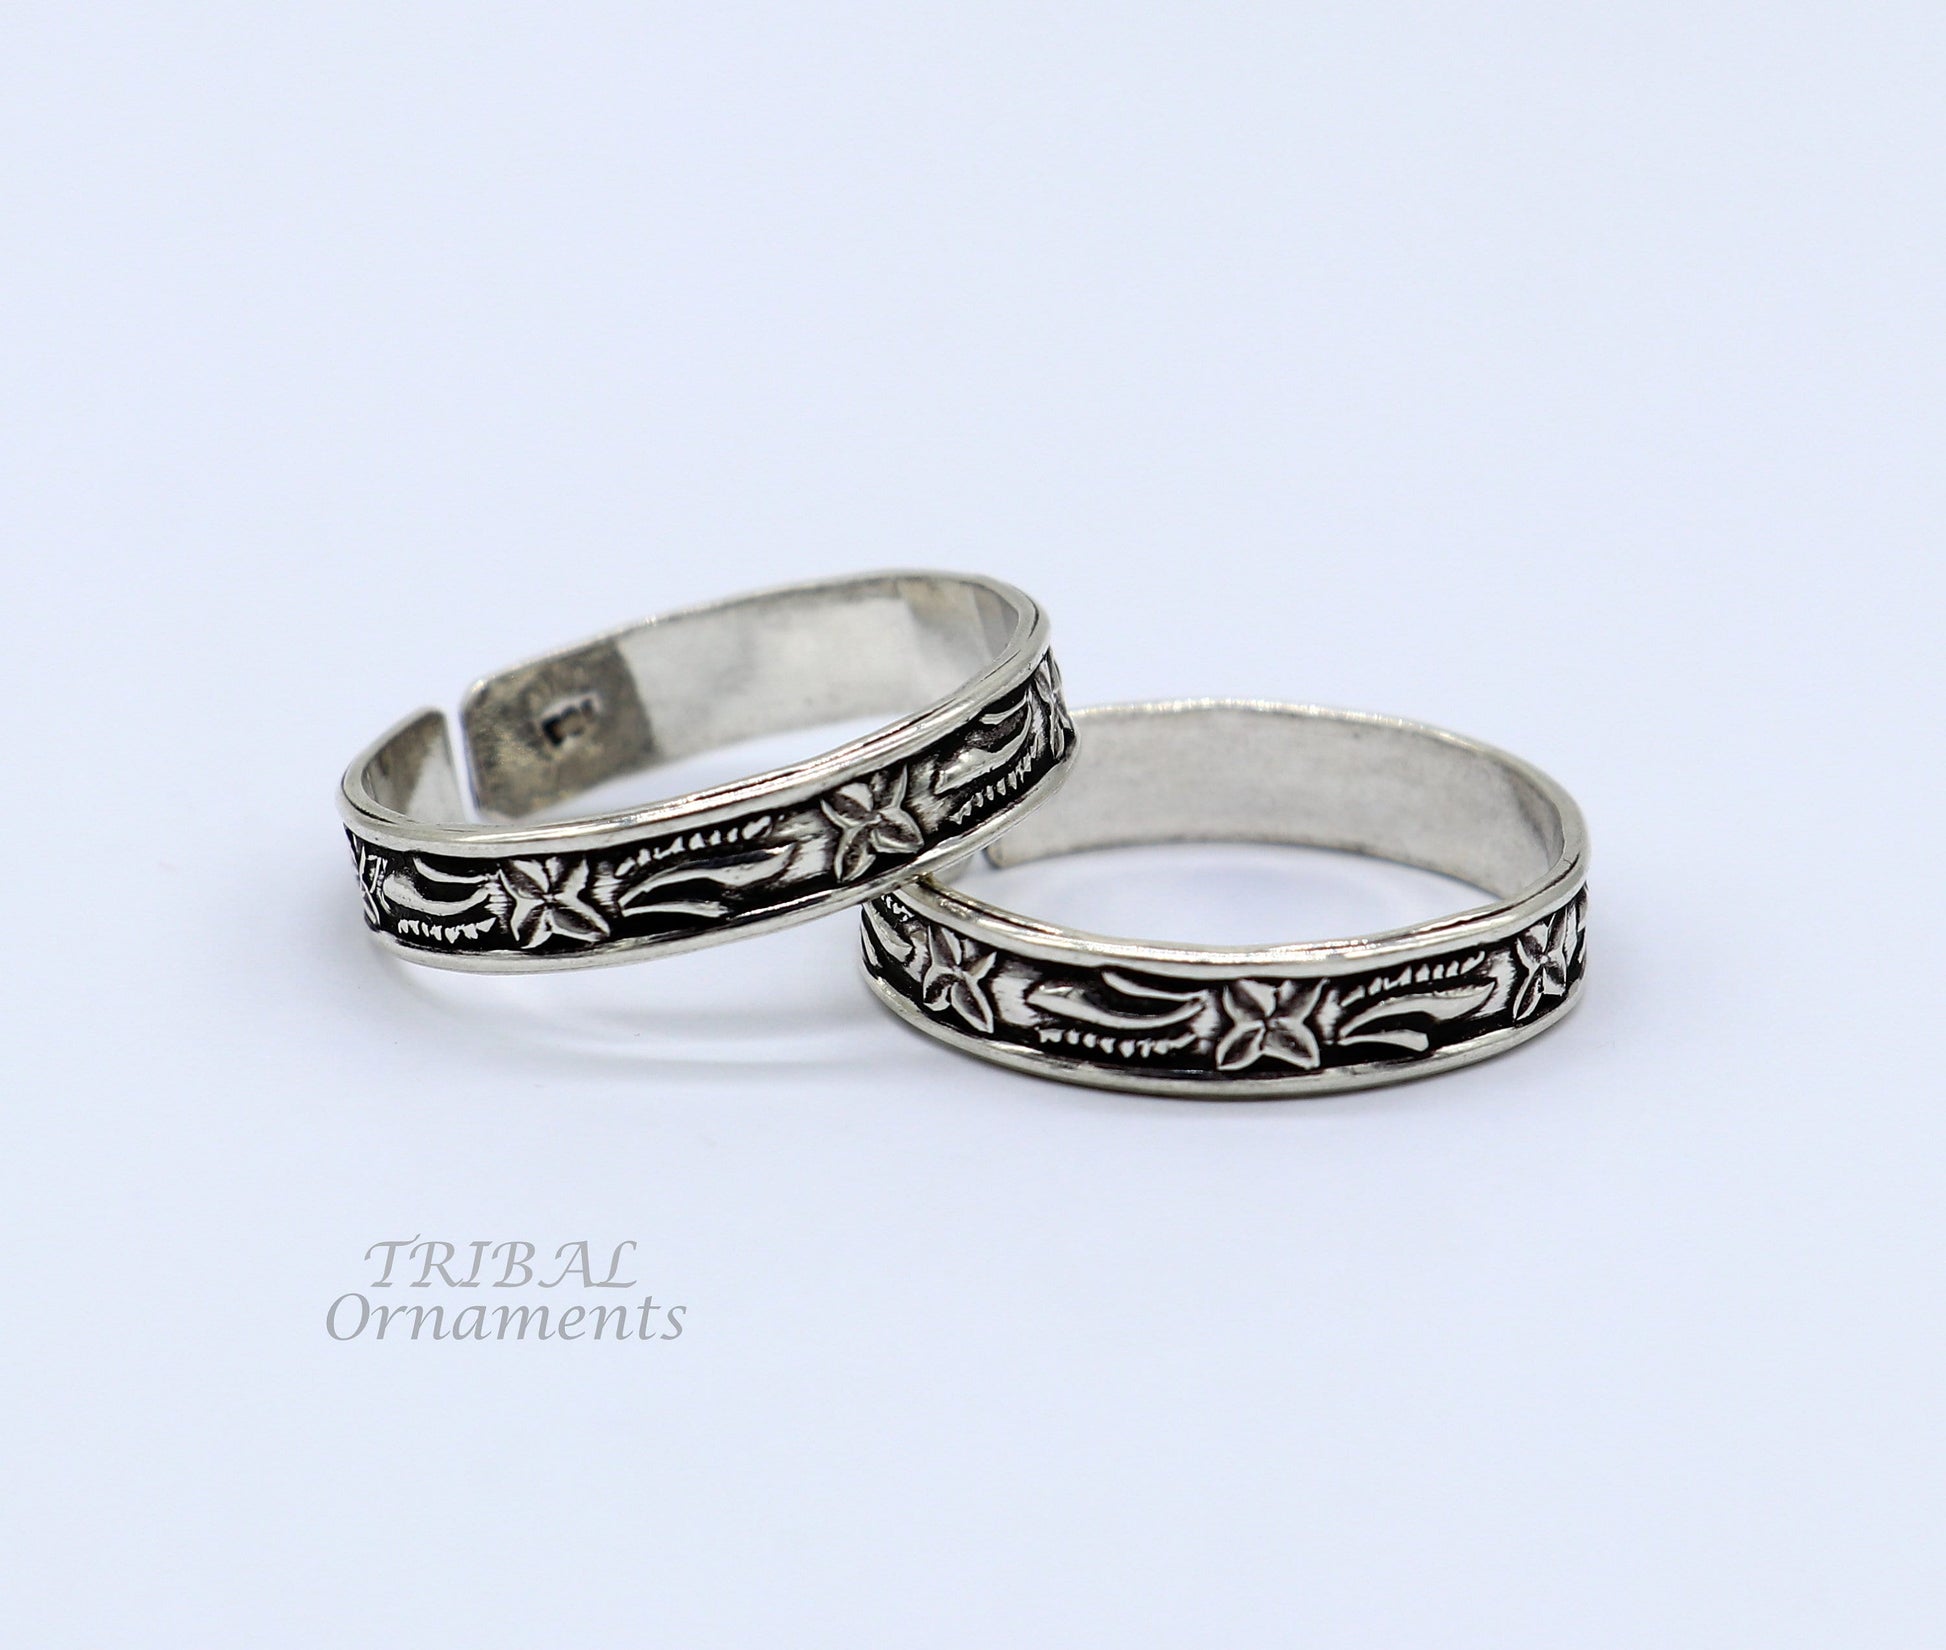 thumb ring 925 sterling silver traditional cultural design thumb ring for foot, thumb toe ring band for brides wedding jewelry  ntr68 - TRIBAL ORNAMENTS